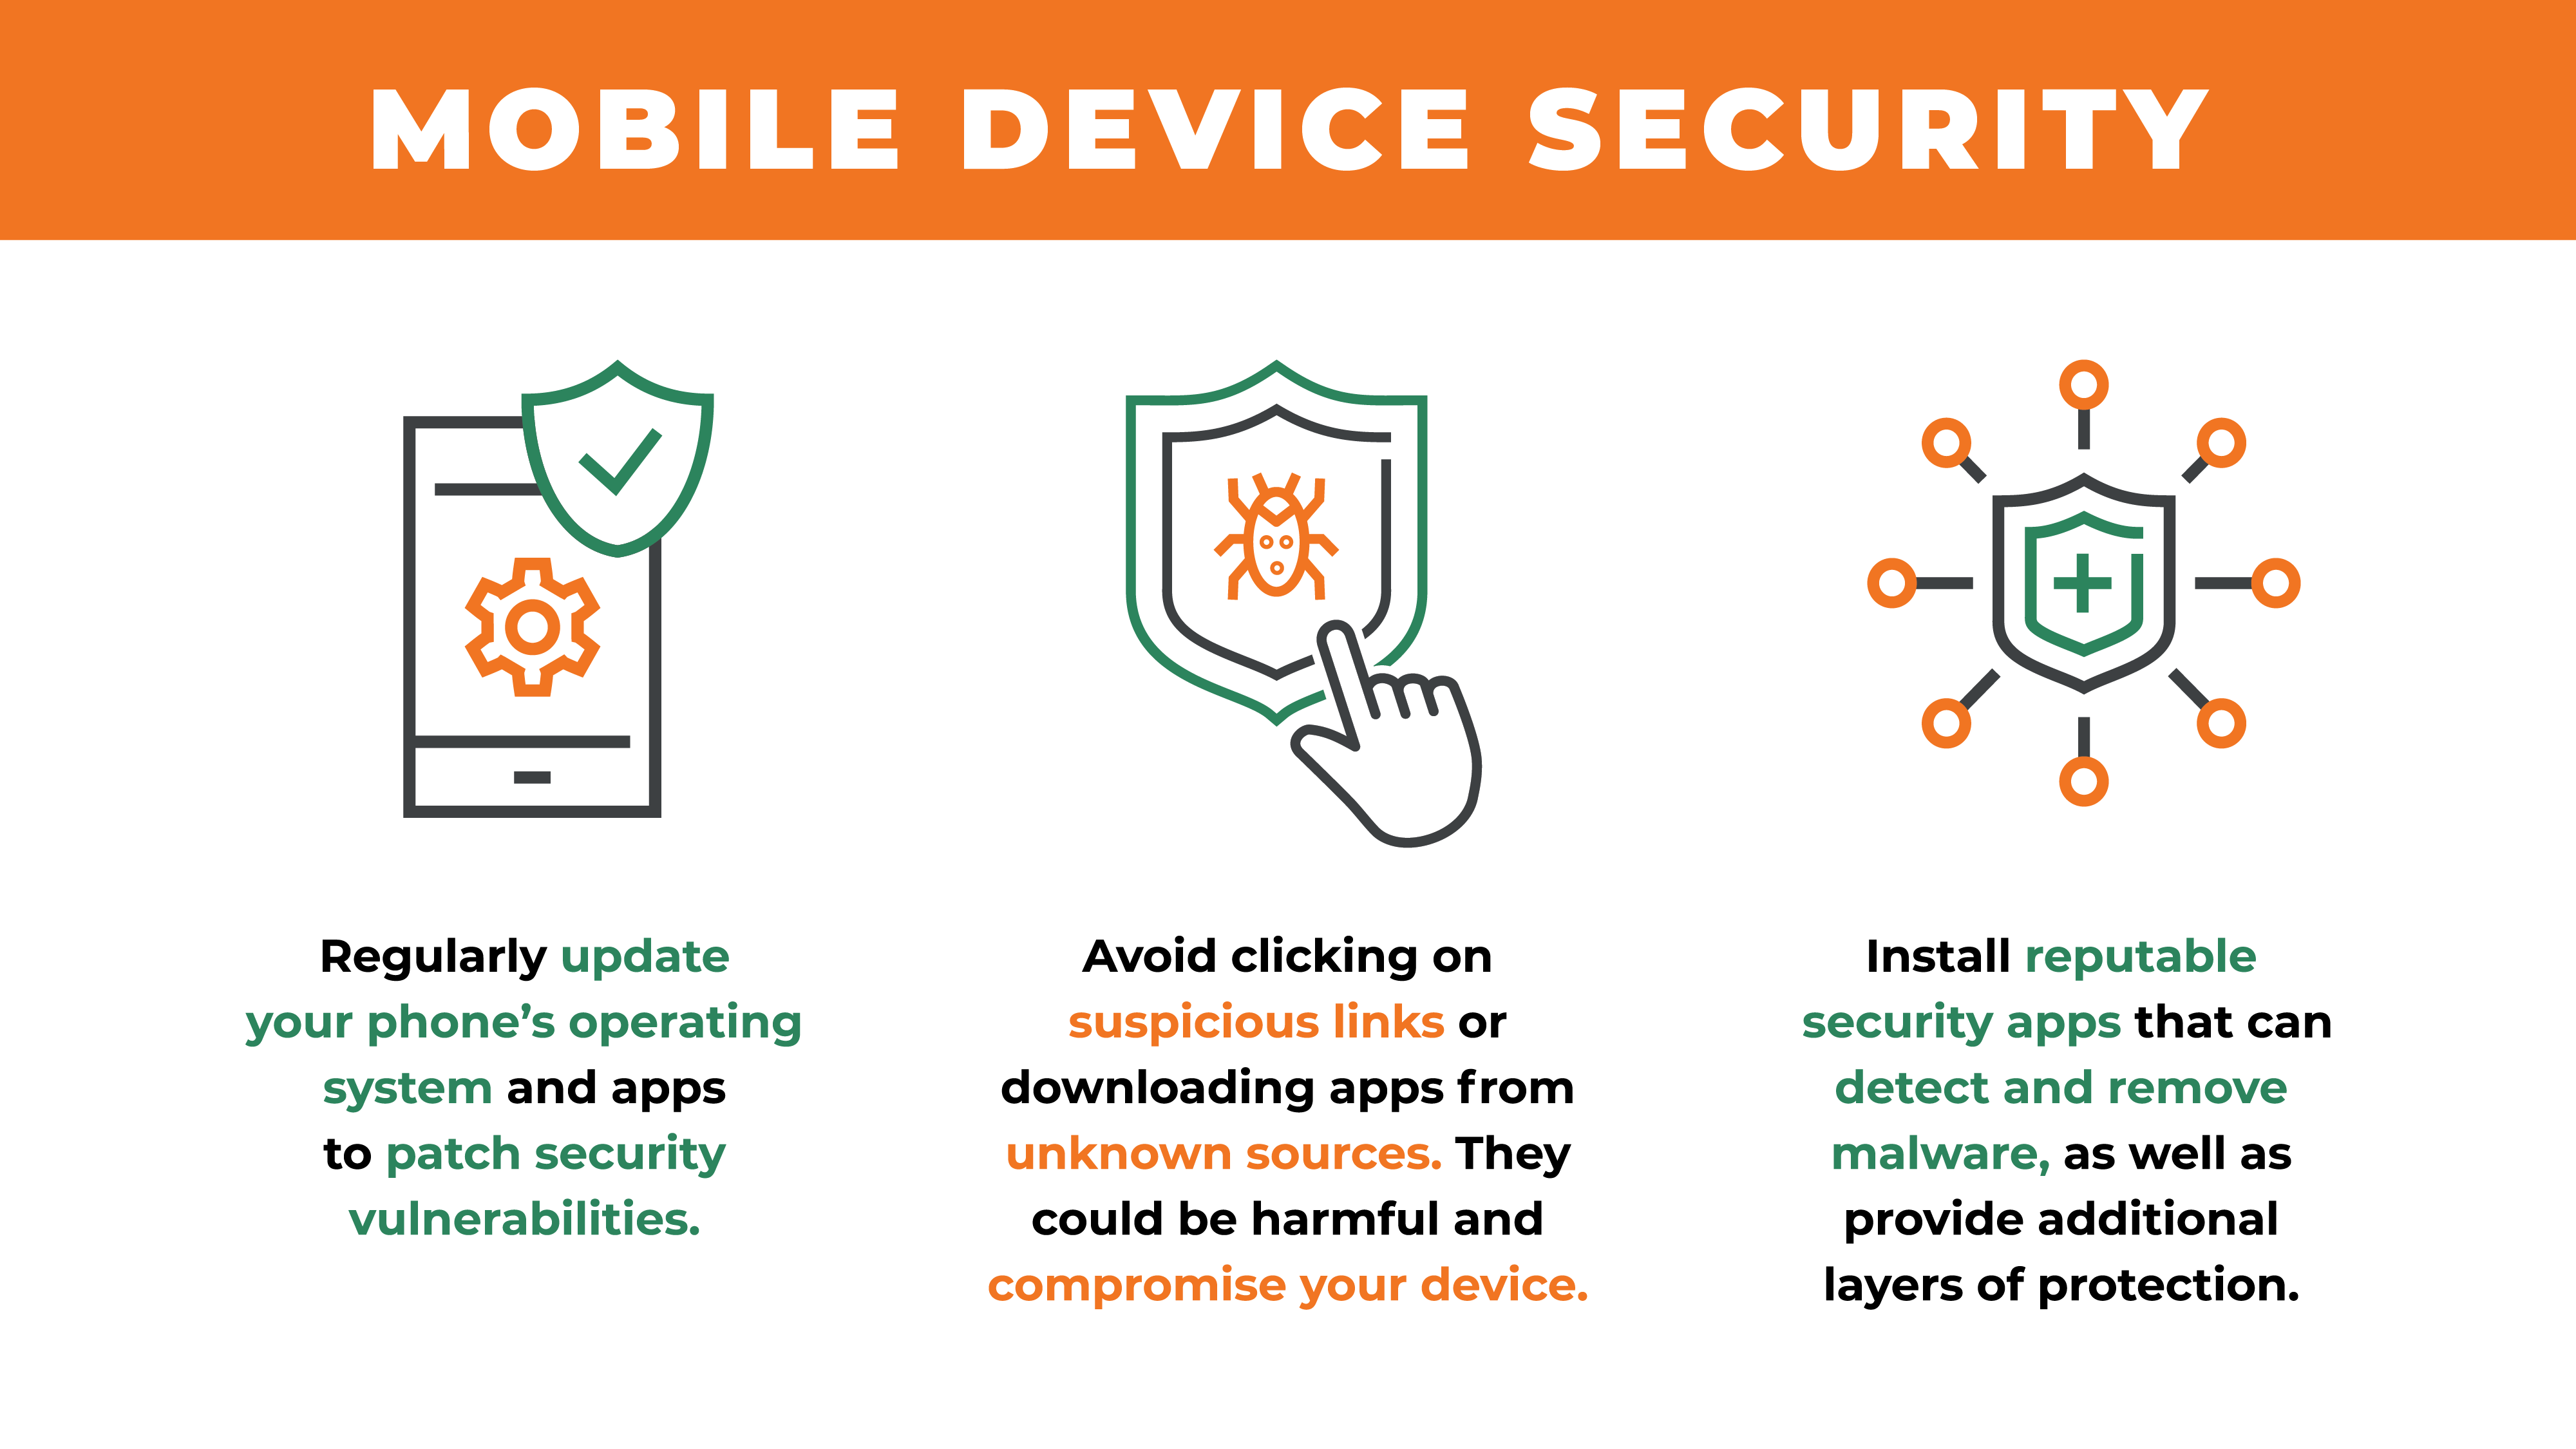 Regularly update your phones operating system and apps to patch security vulnerabilities. Avoid clicking on suspicious links or downloading apps from unknown sources. They could be harmful and compromise your device. Install reputable security apps that can detect and remove malware, as well as provide additional layers of protection.